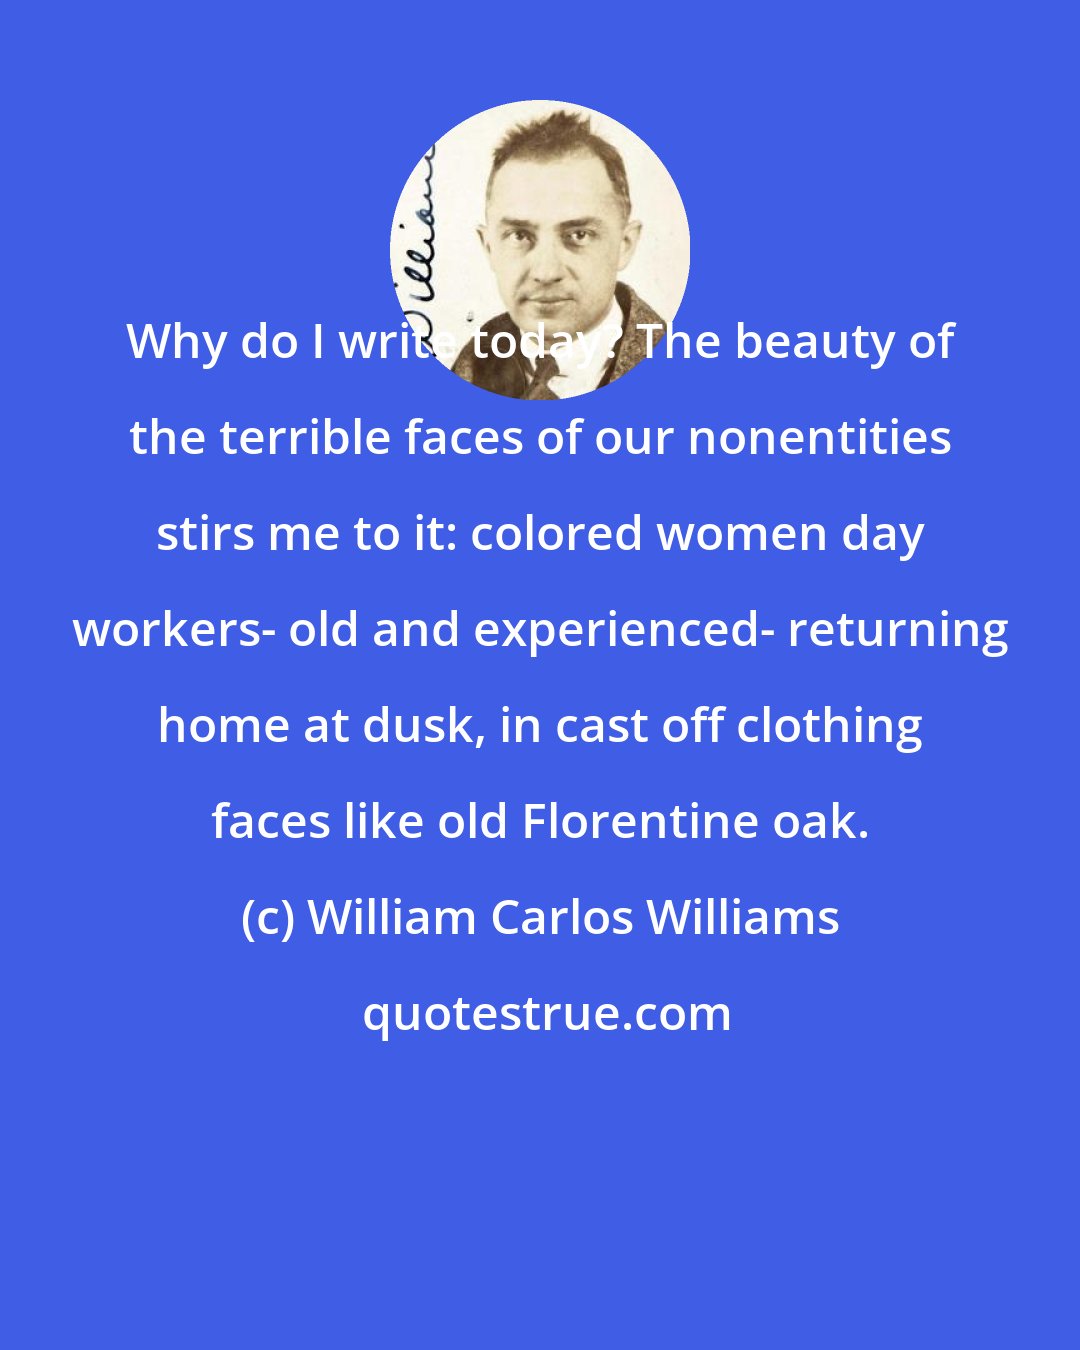 William Carlos Williams: Why do I write today? The beauty of the terrible faces of our nonentities stirs me to it: colored women day workers- old and experienced- returning home at dusk, in cast off clothing faces like old Florentine oak.